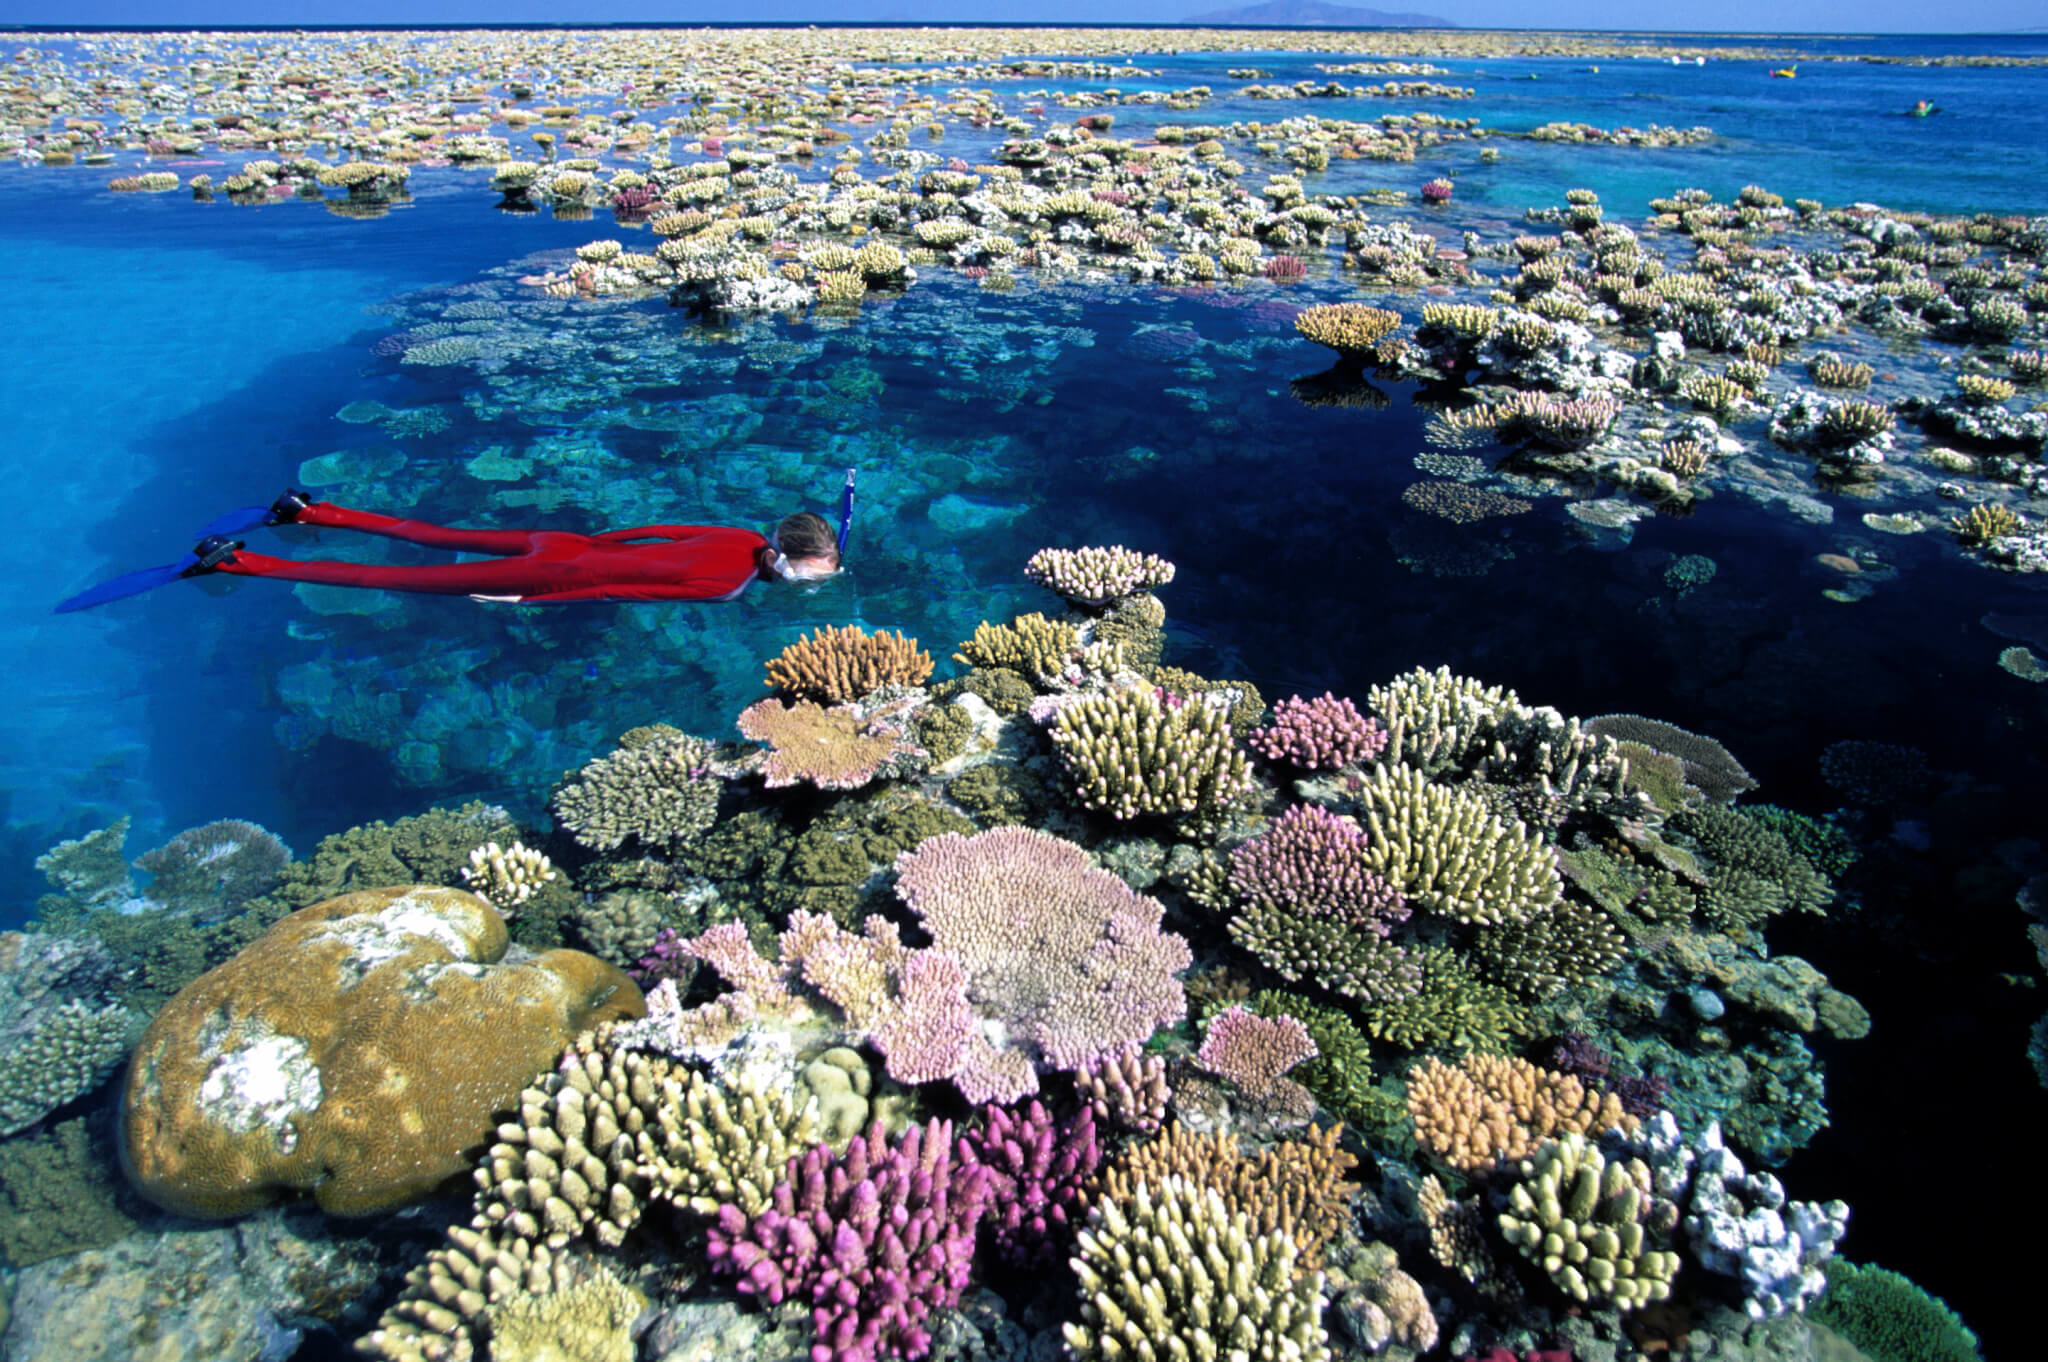 Great Barrier Reef Photo Gallery - Sea for Yourself - Snorkeling Safaris